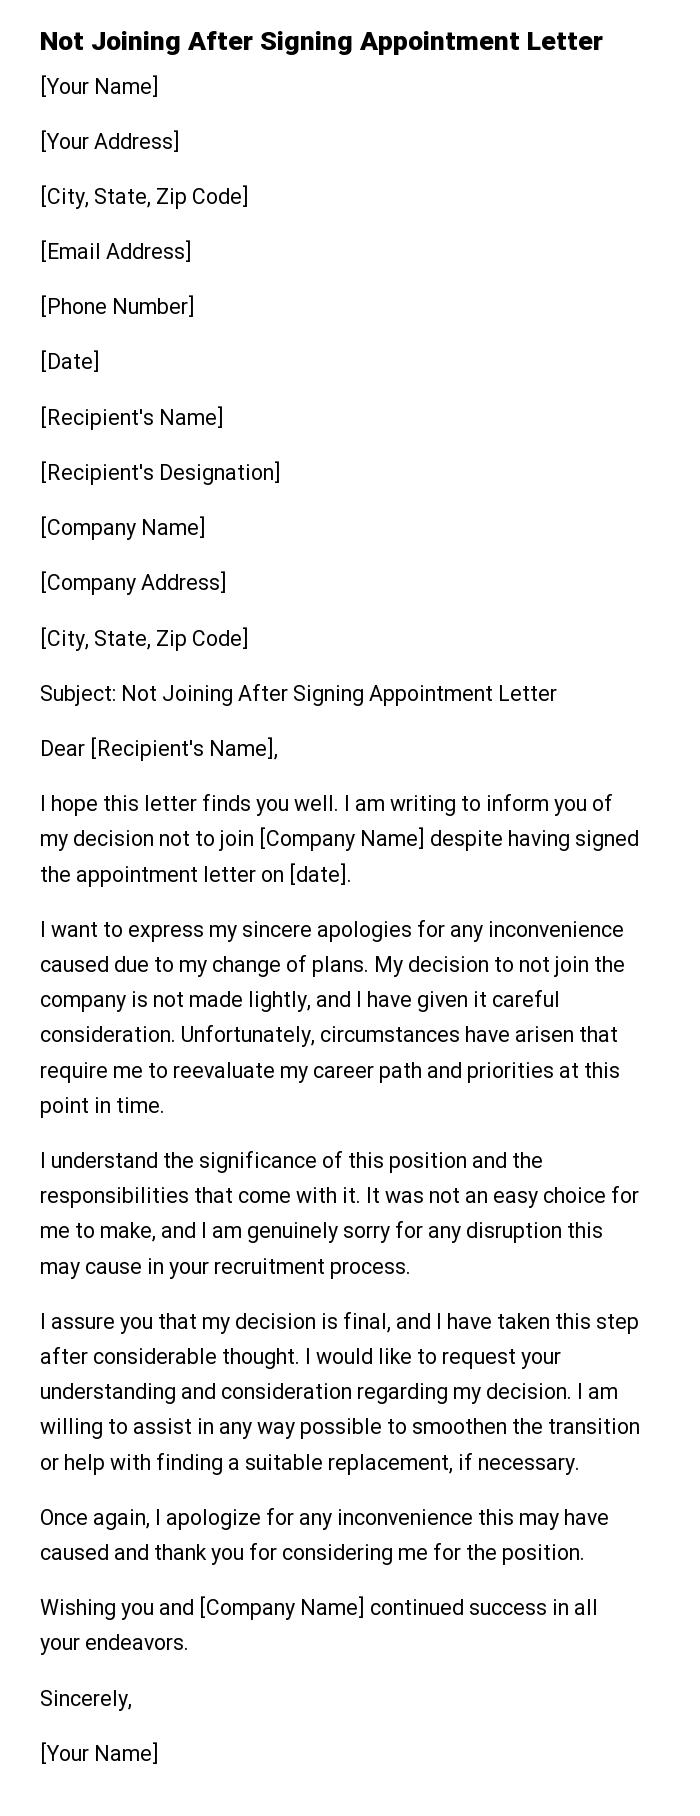 Not Joining After Signing Appointment Letter